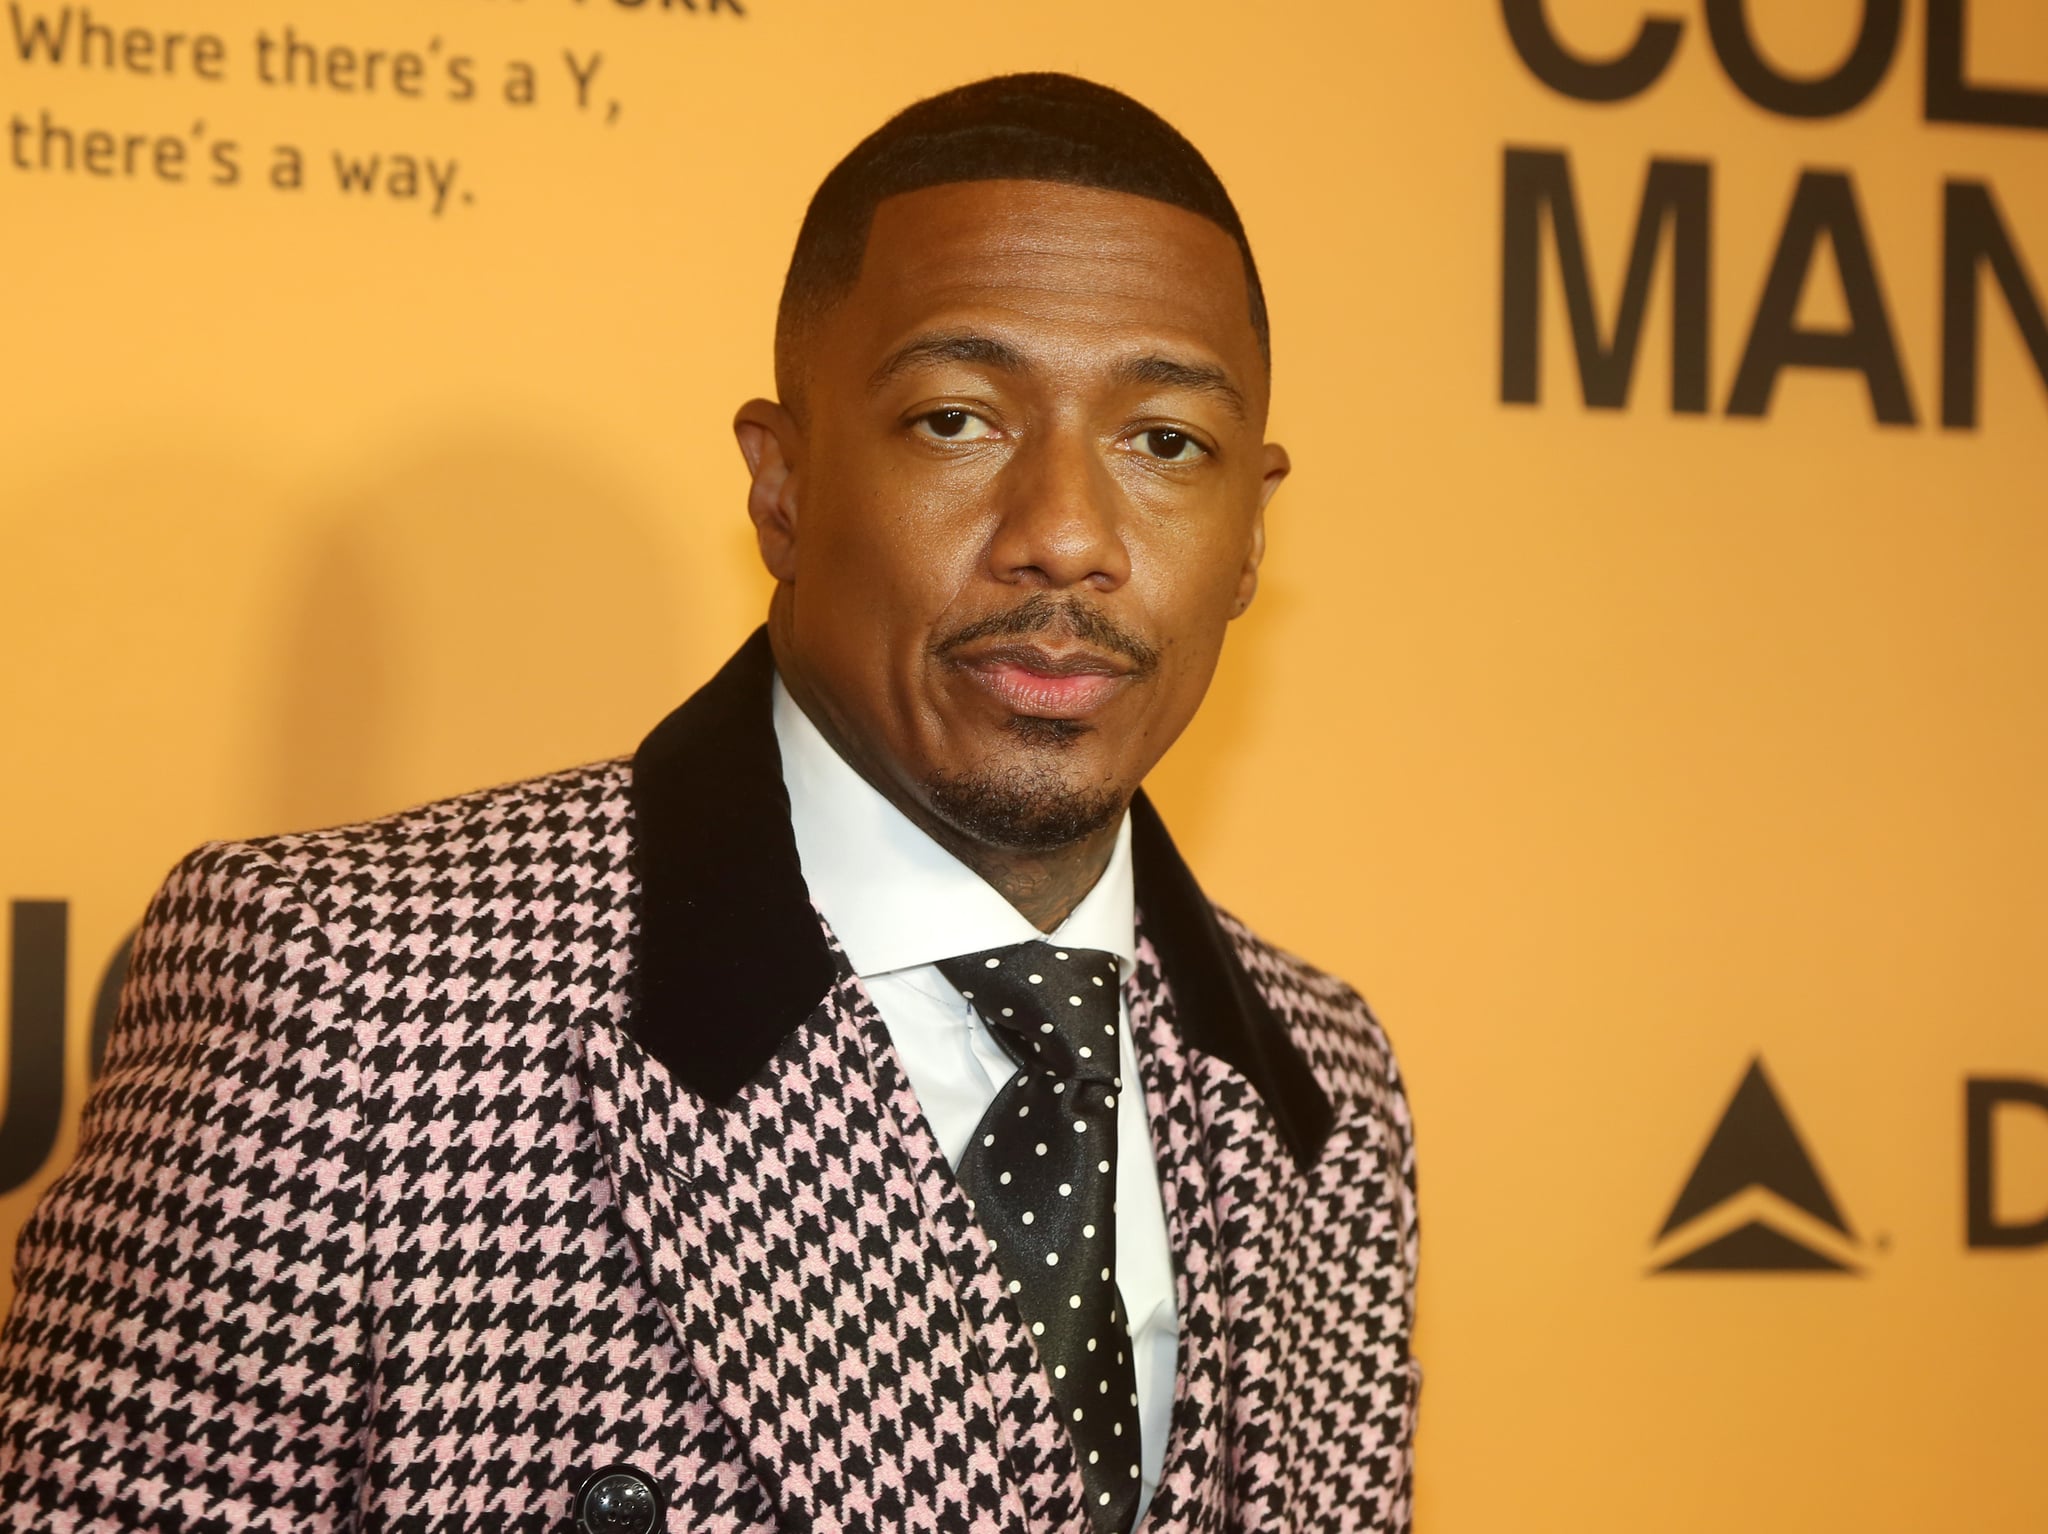 Nick Cannon poses at the opening night of the new play